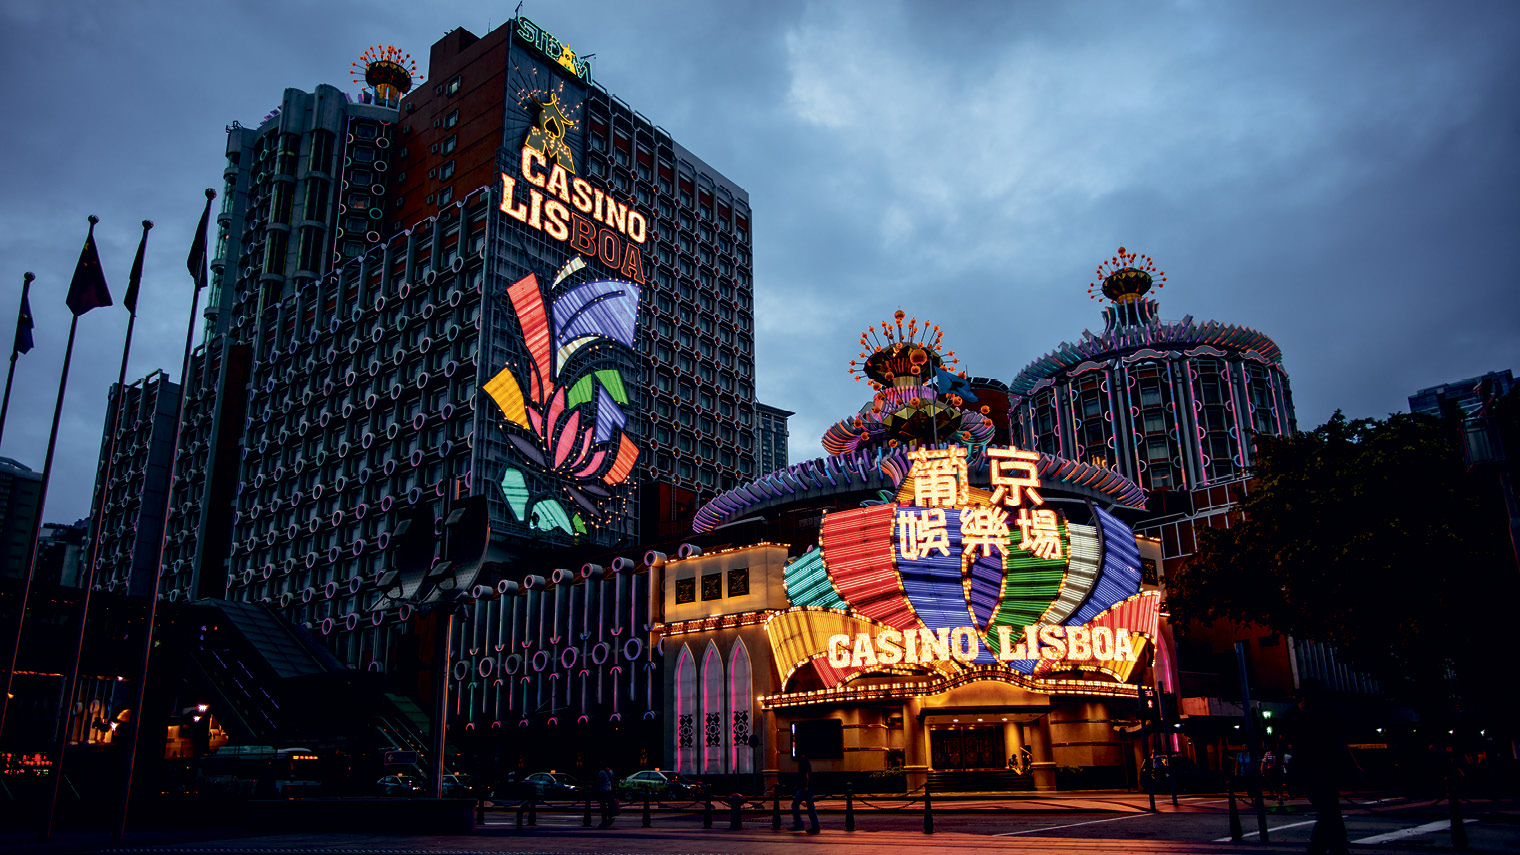 Since being handed back to China in 1999, Macau’s economy has depended on the entertainment business